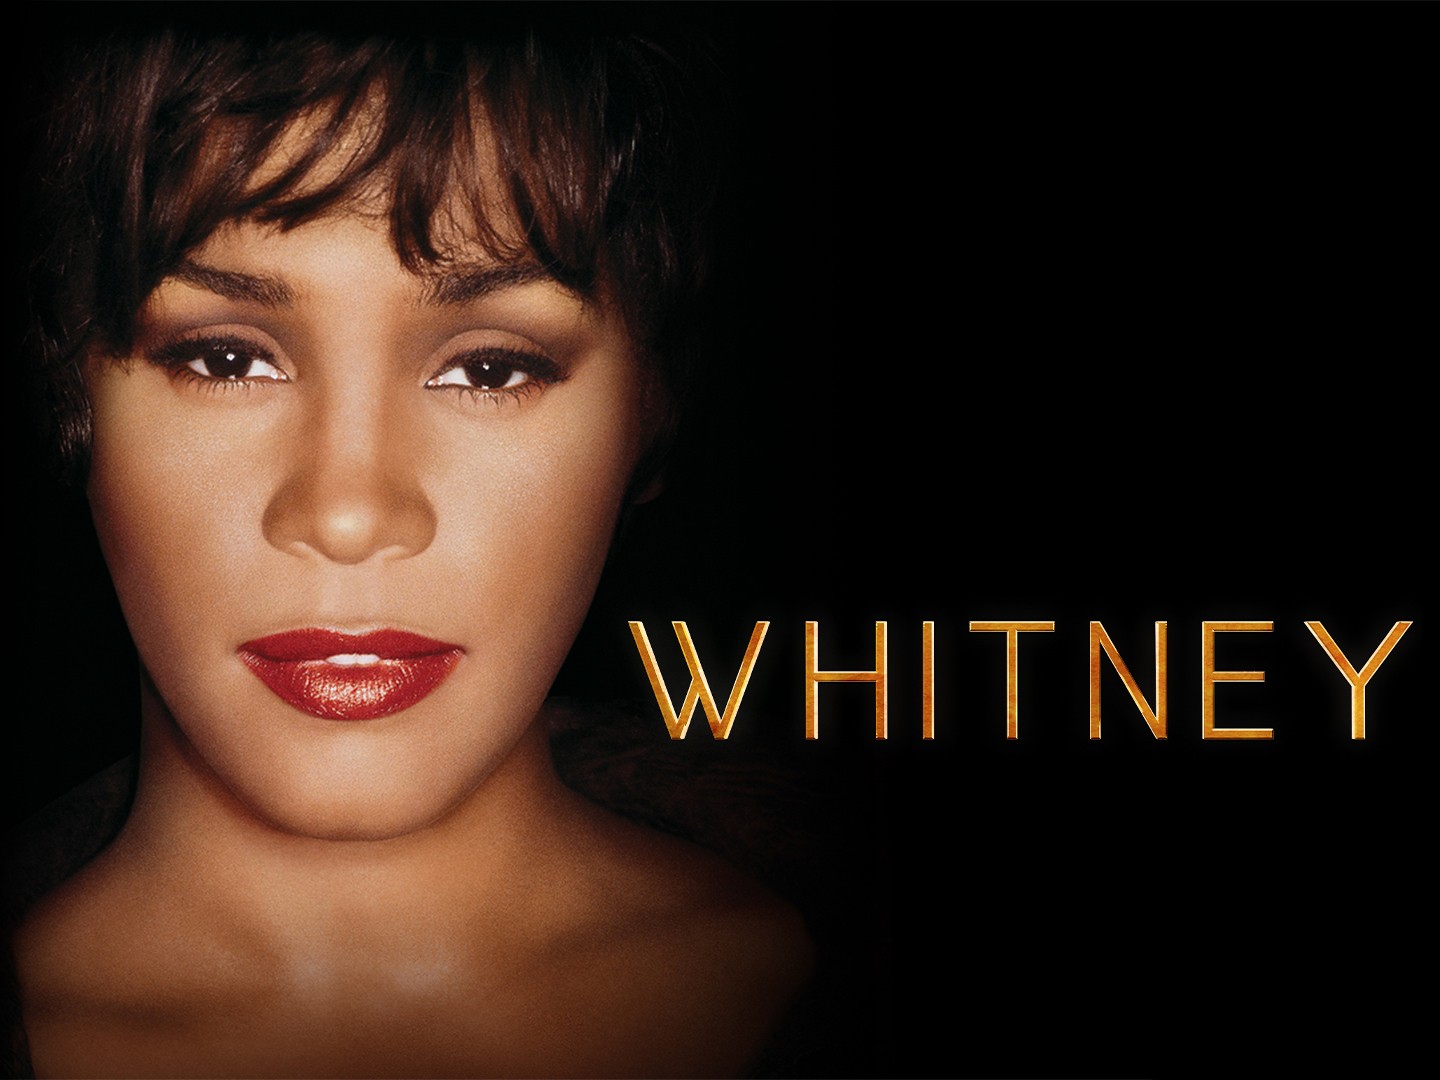 Whitney may be at the end of the road at age 42